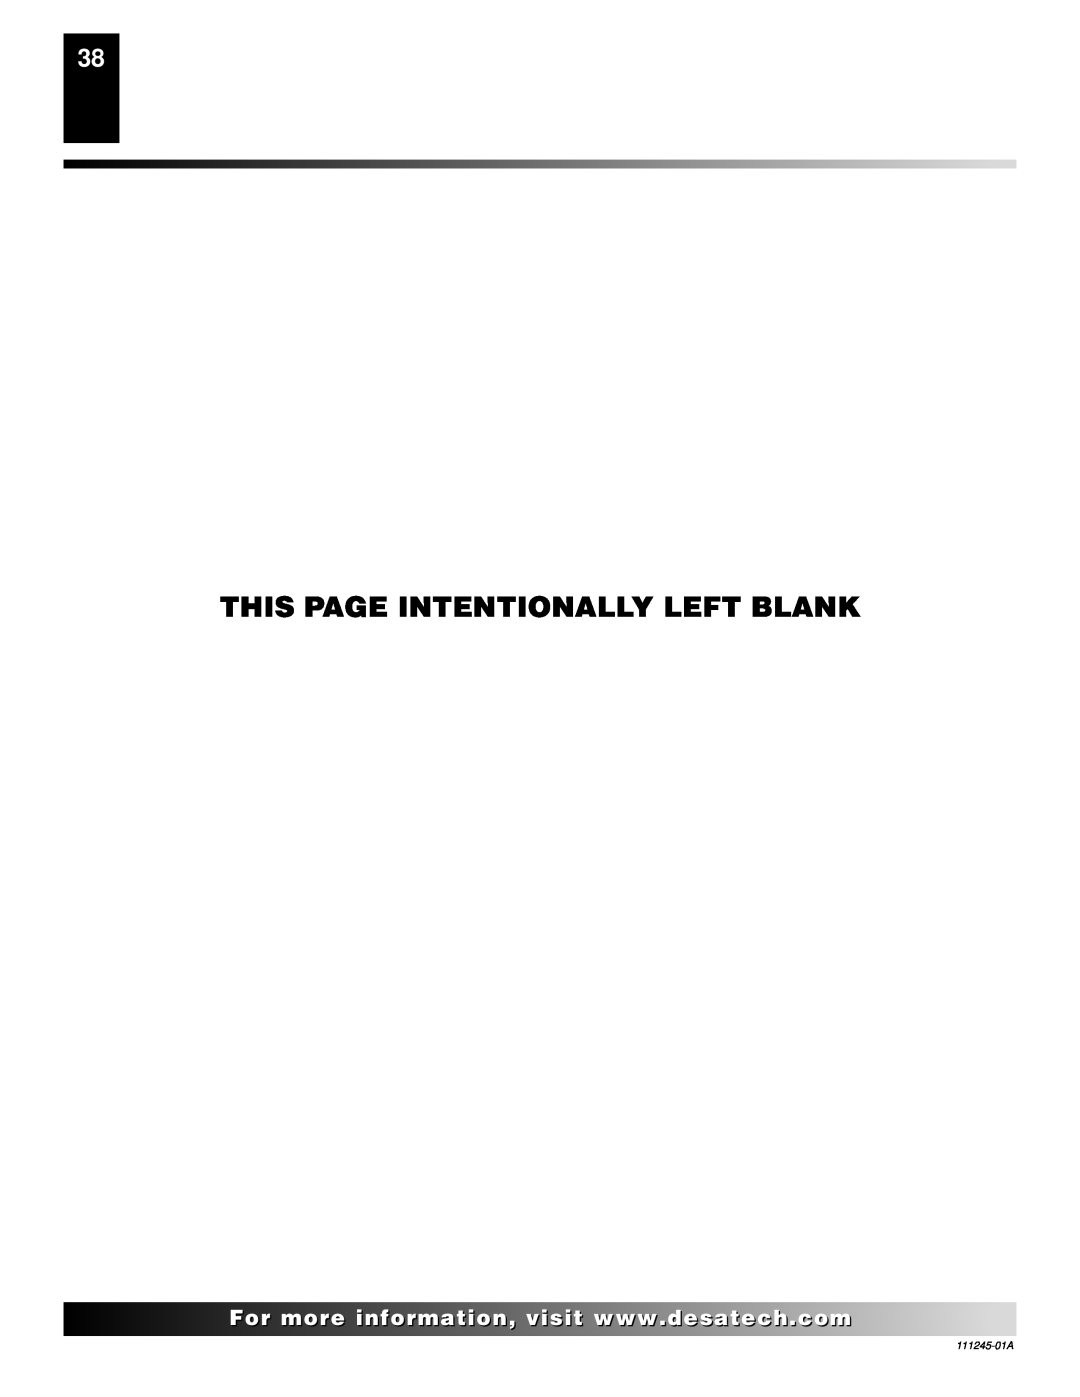 Desa CGEFP33PRB, CGEFP33NRB installation manual This Page Intentionally Left Blank, 111245-01A 